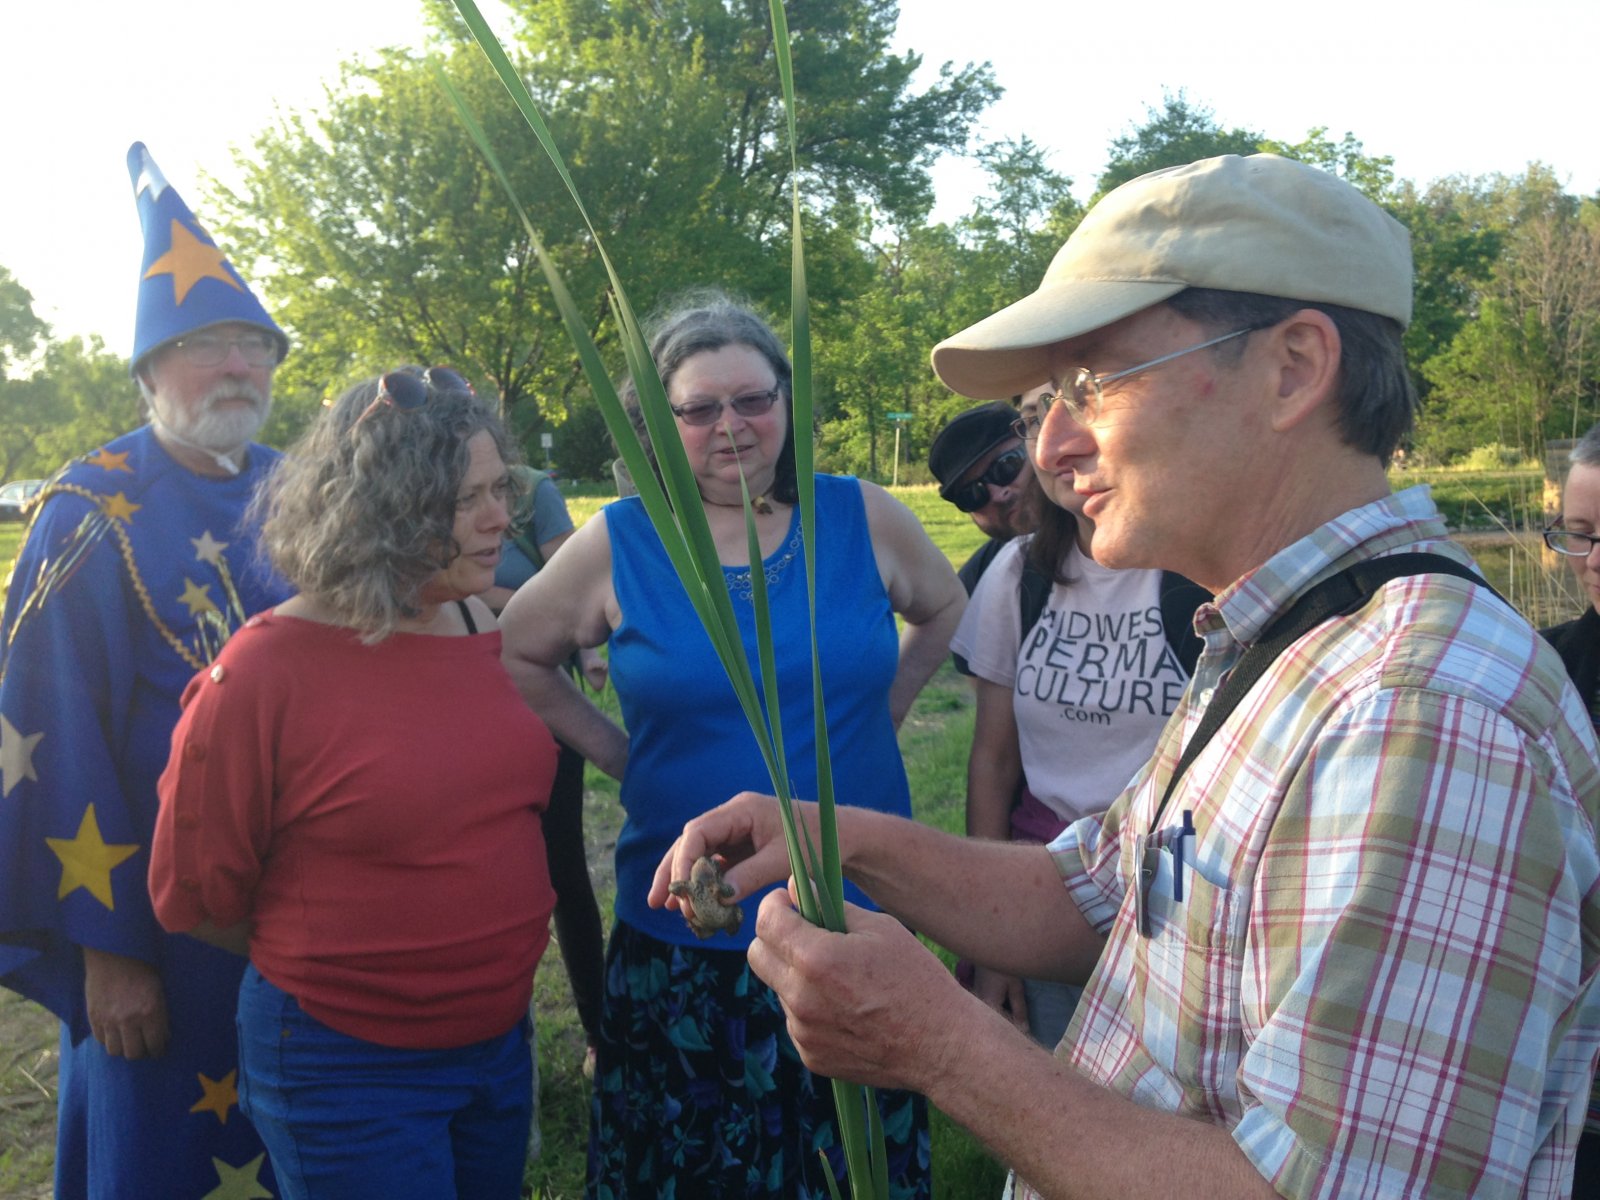 One timebank member leads other members on an edible plant walk, teaching how to identify and use wild edible plants.